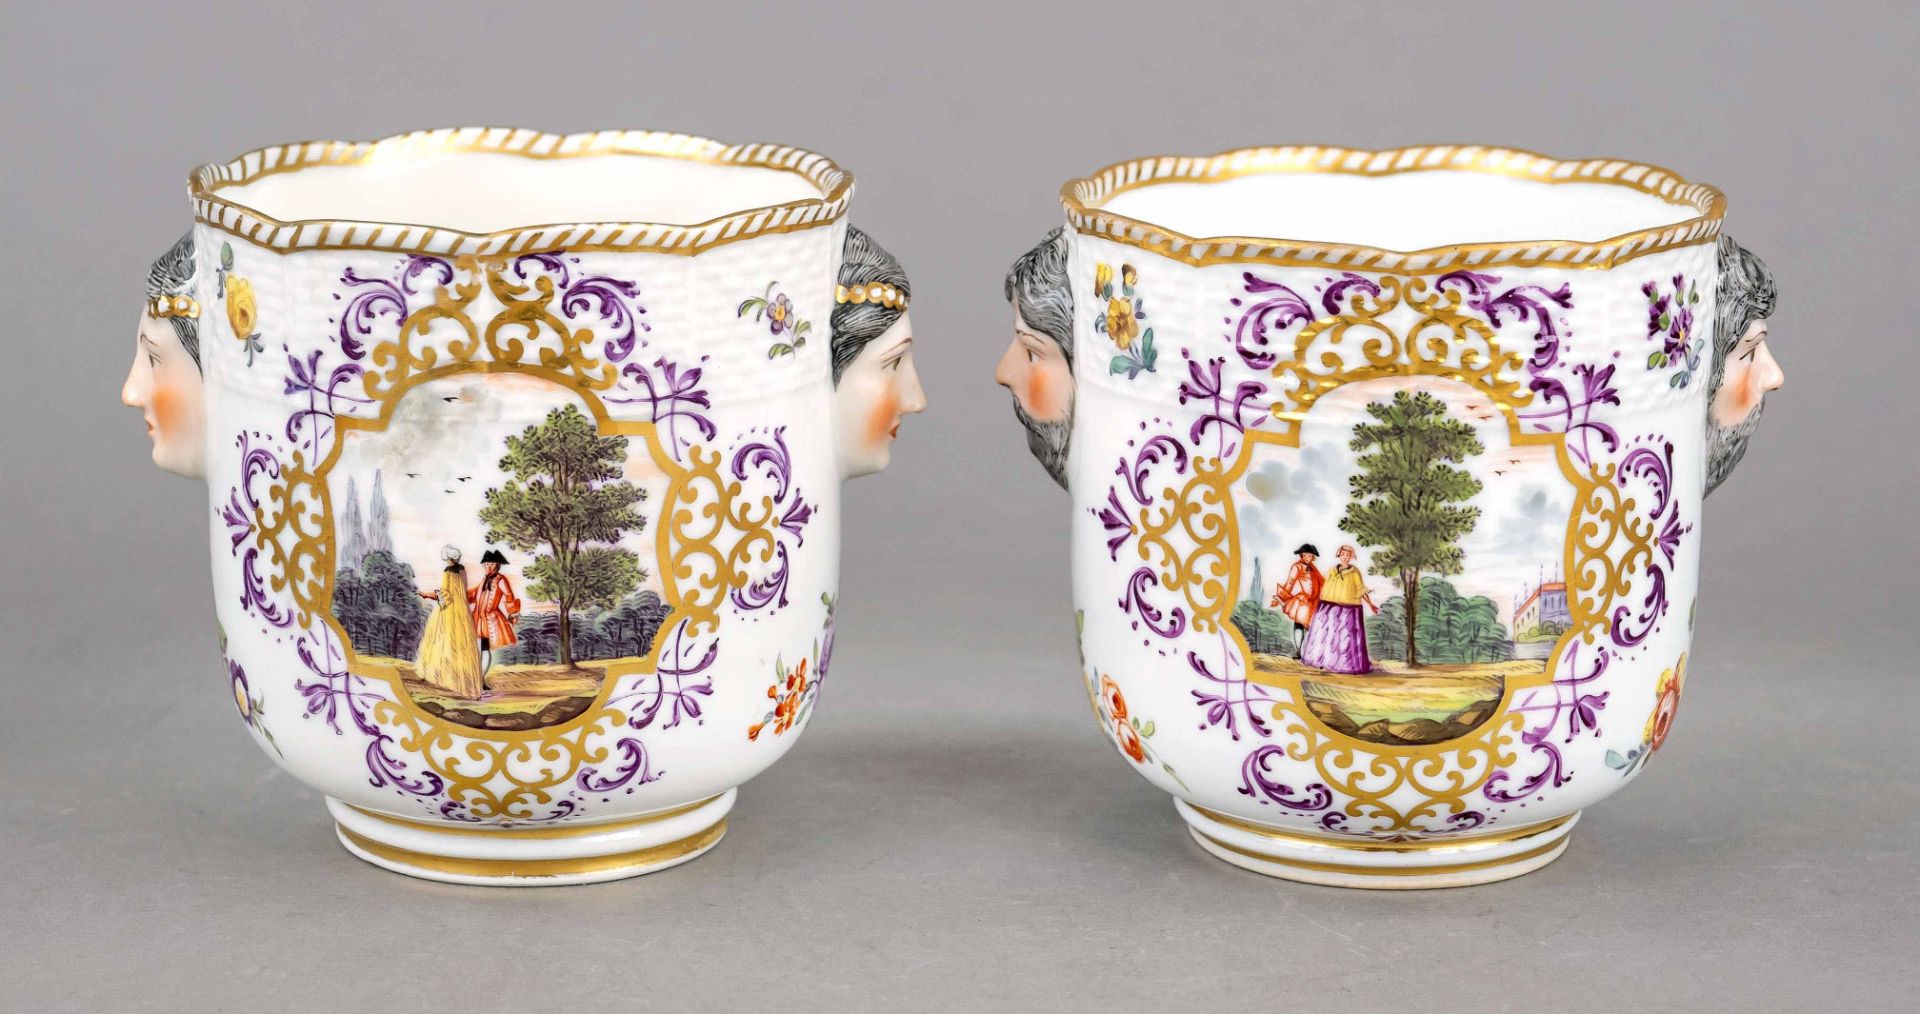 Pair of cachepots, Meissen, Marcolini mark 1774-1814, 1st choice, side handles in the shape of